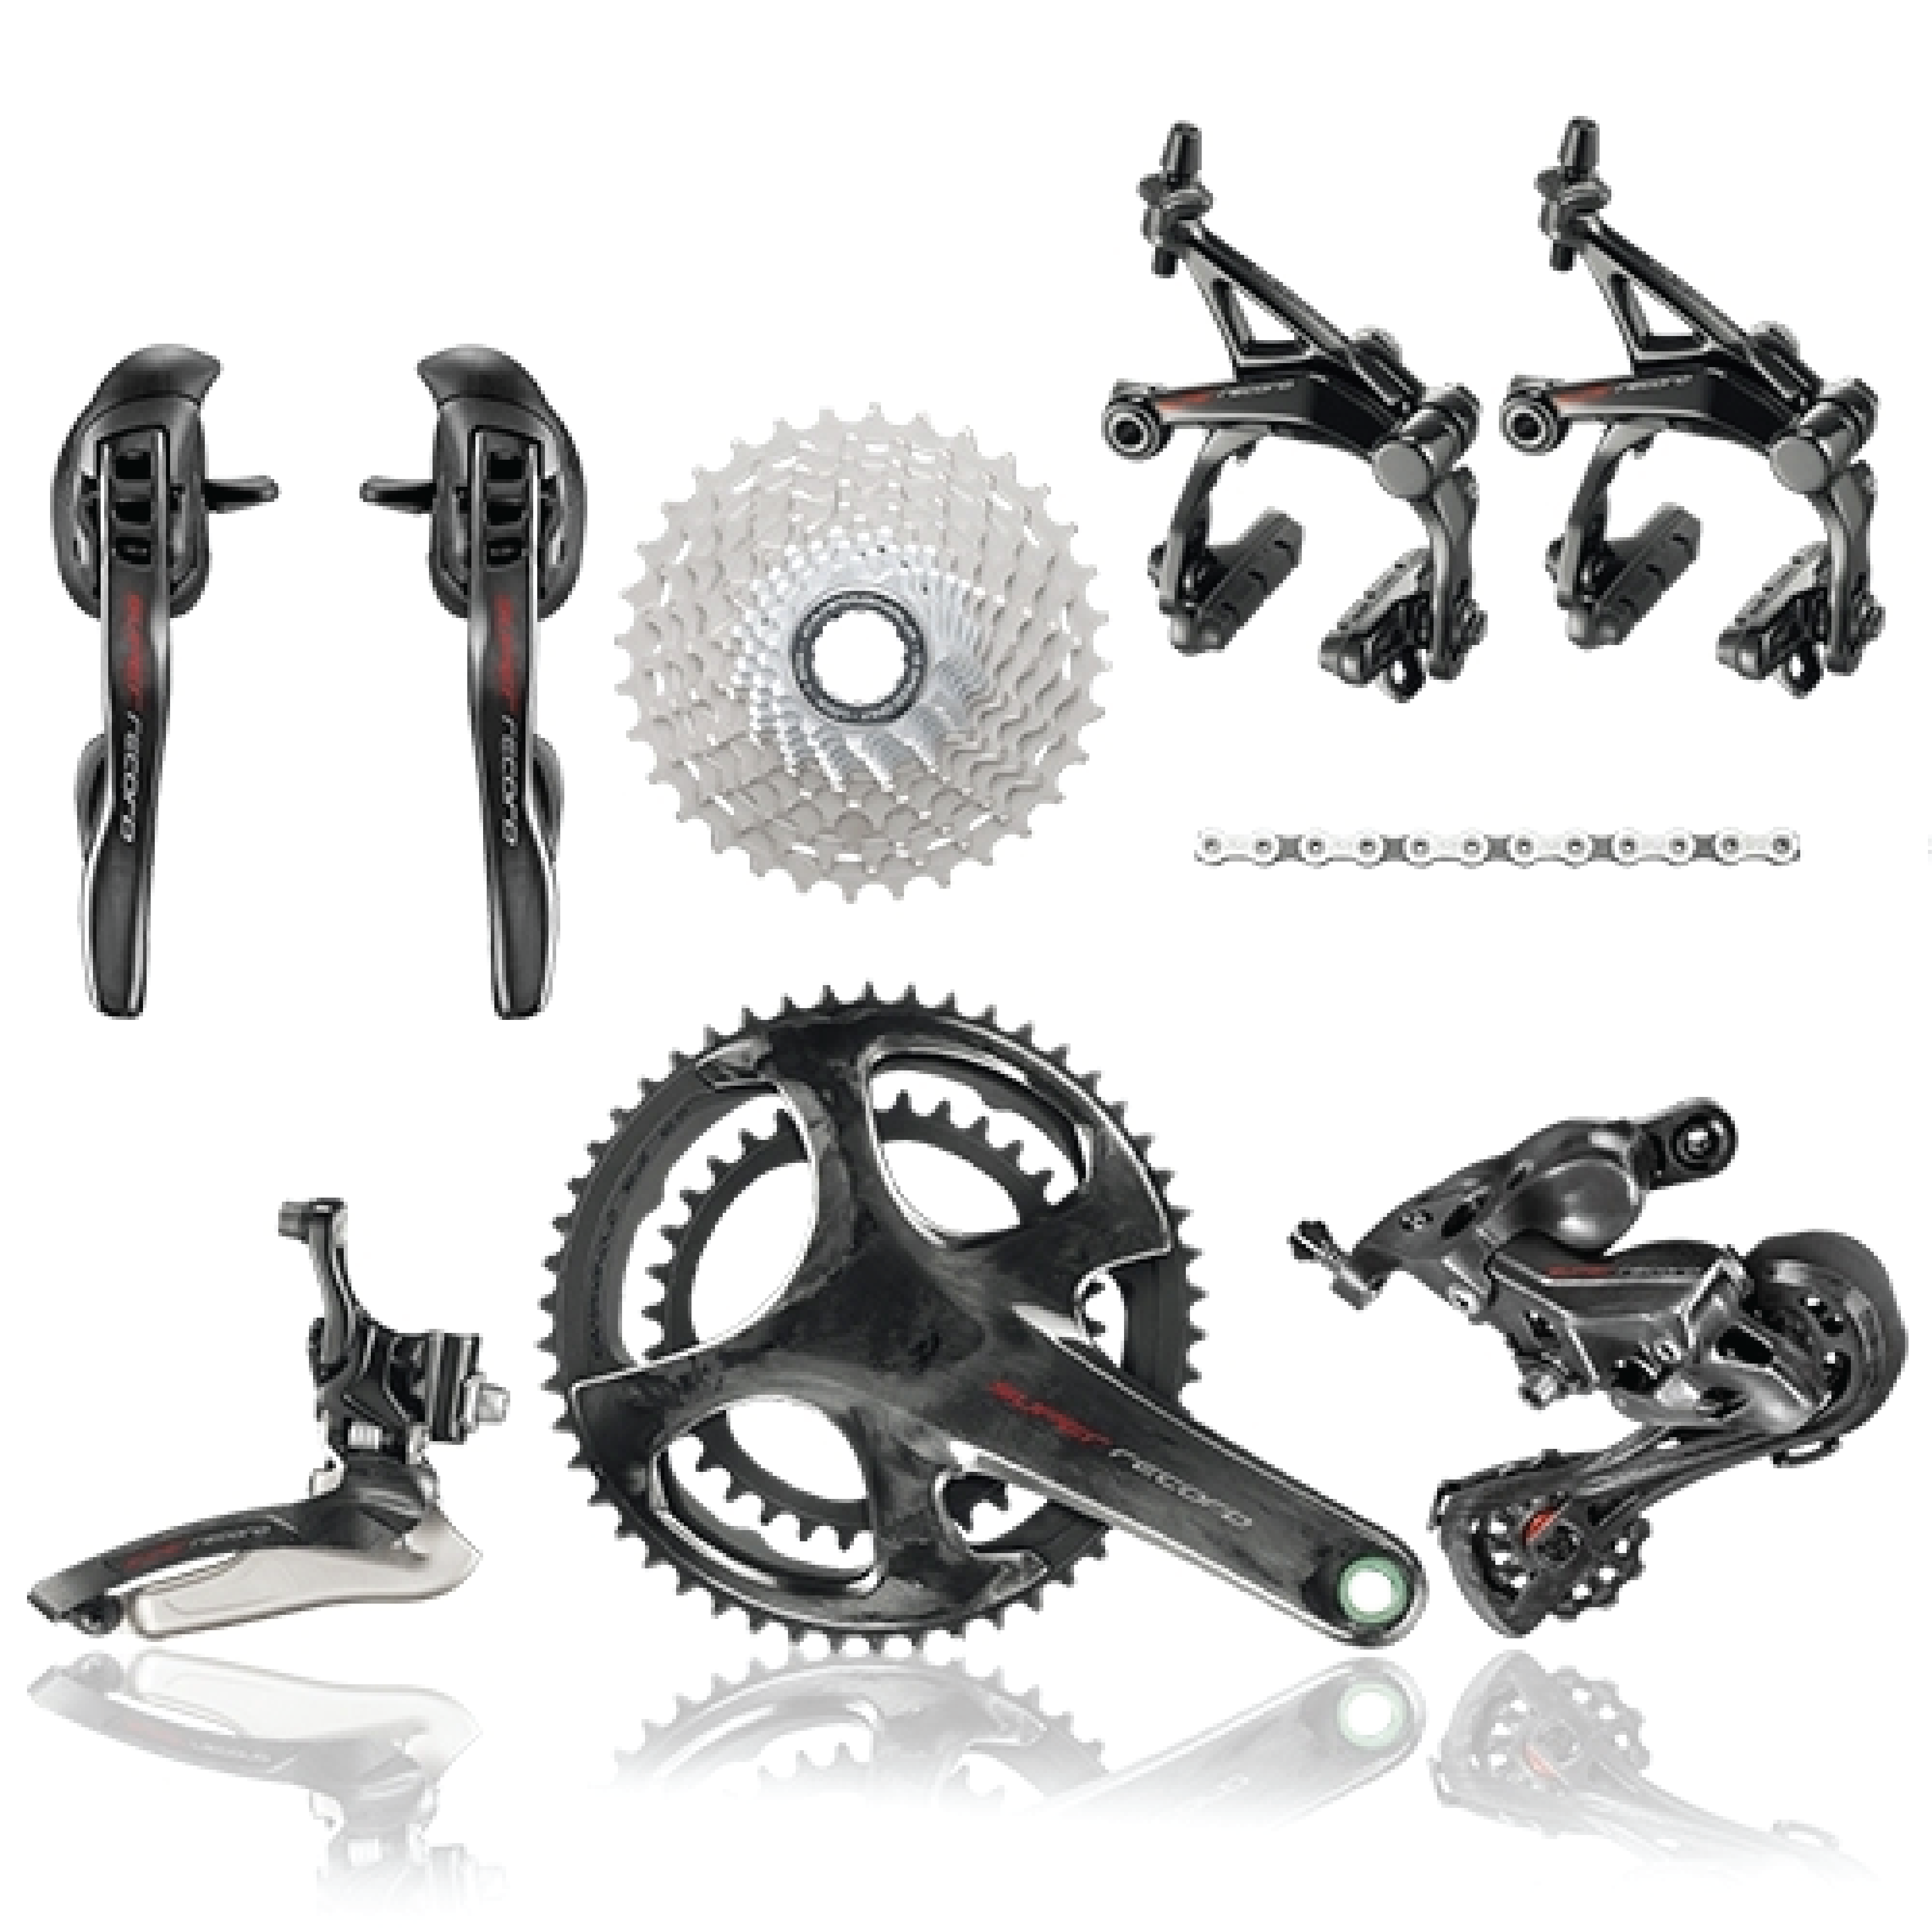 Campagnolo Super Record 12 speed Groupset